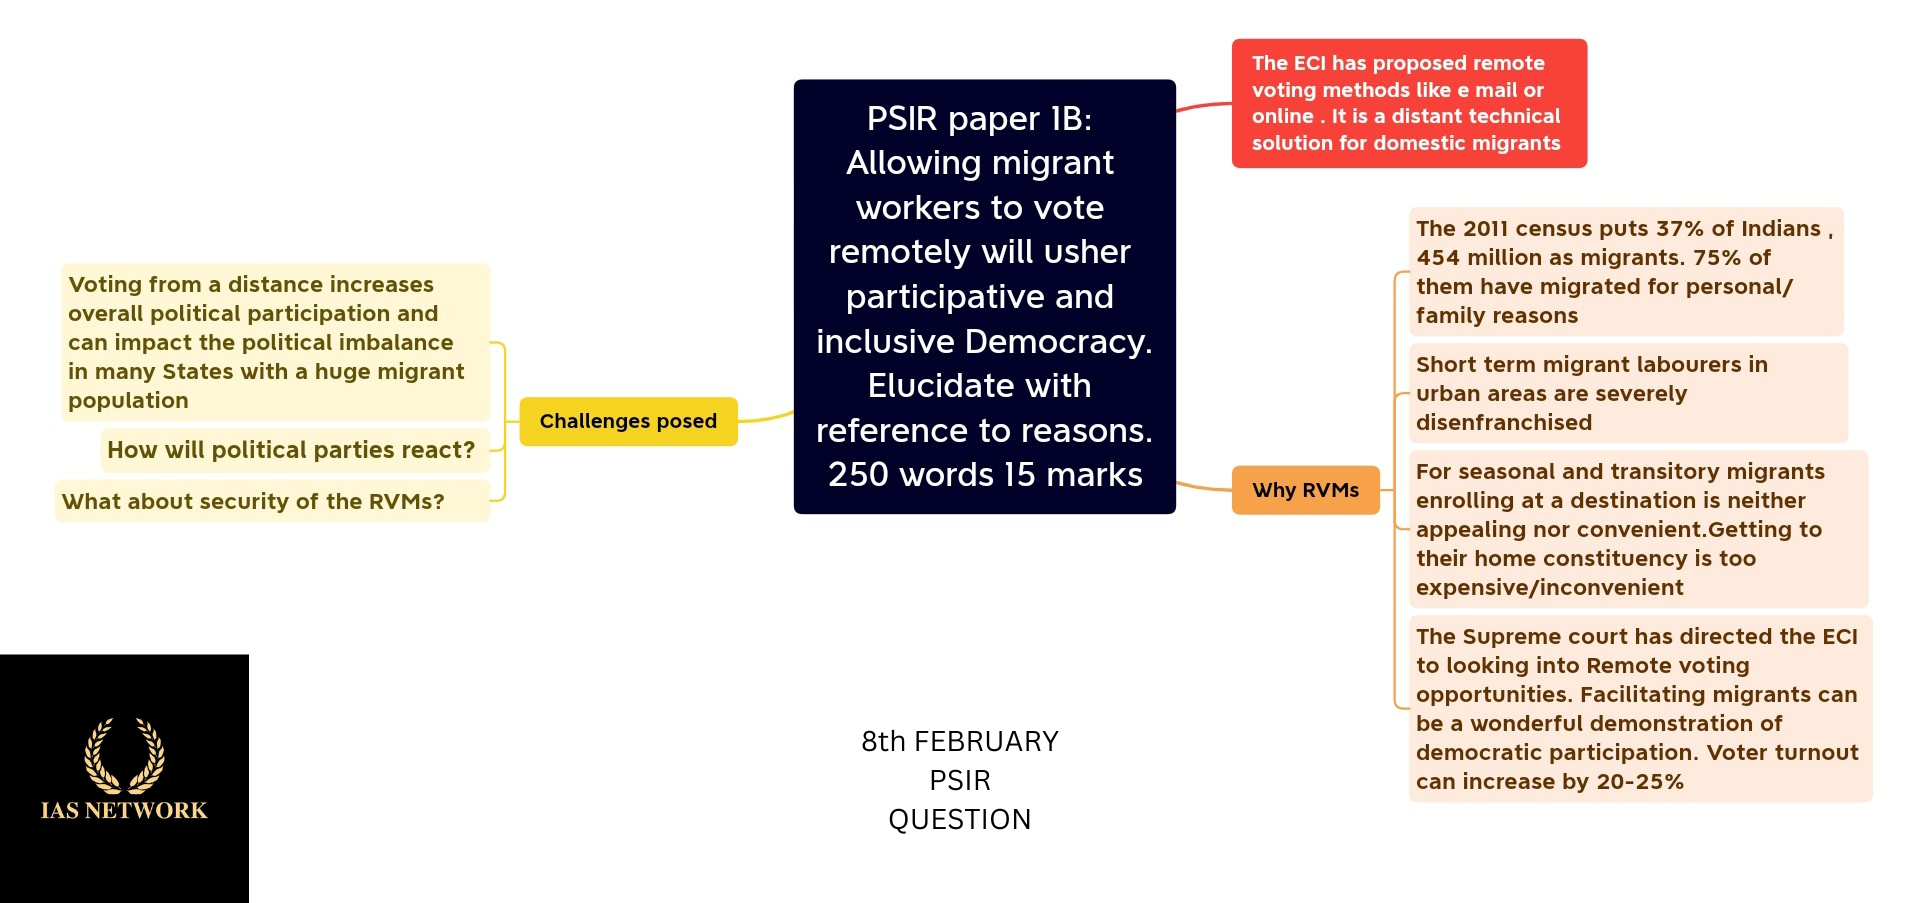 IAS NETWORK 8th FEBRUARY PSIR QUESTION